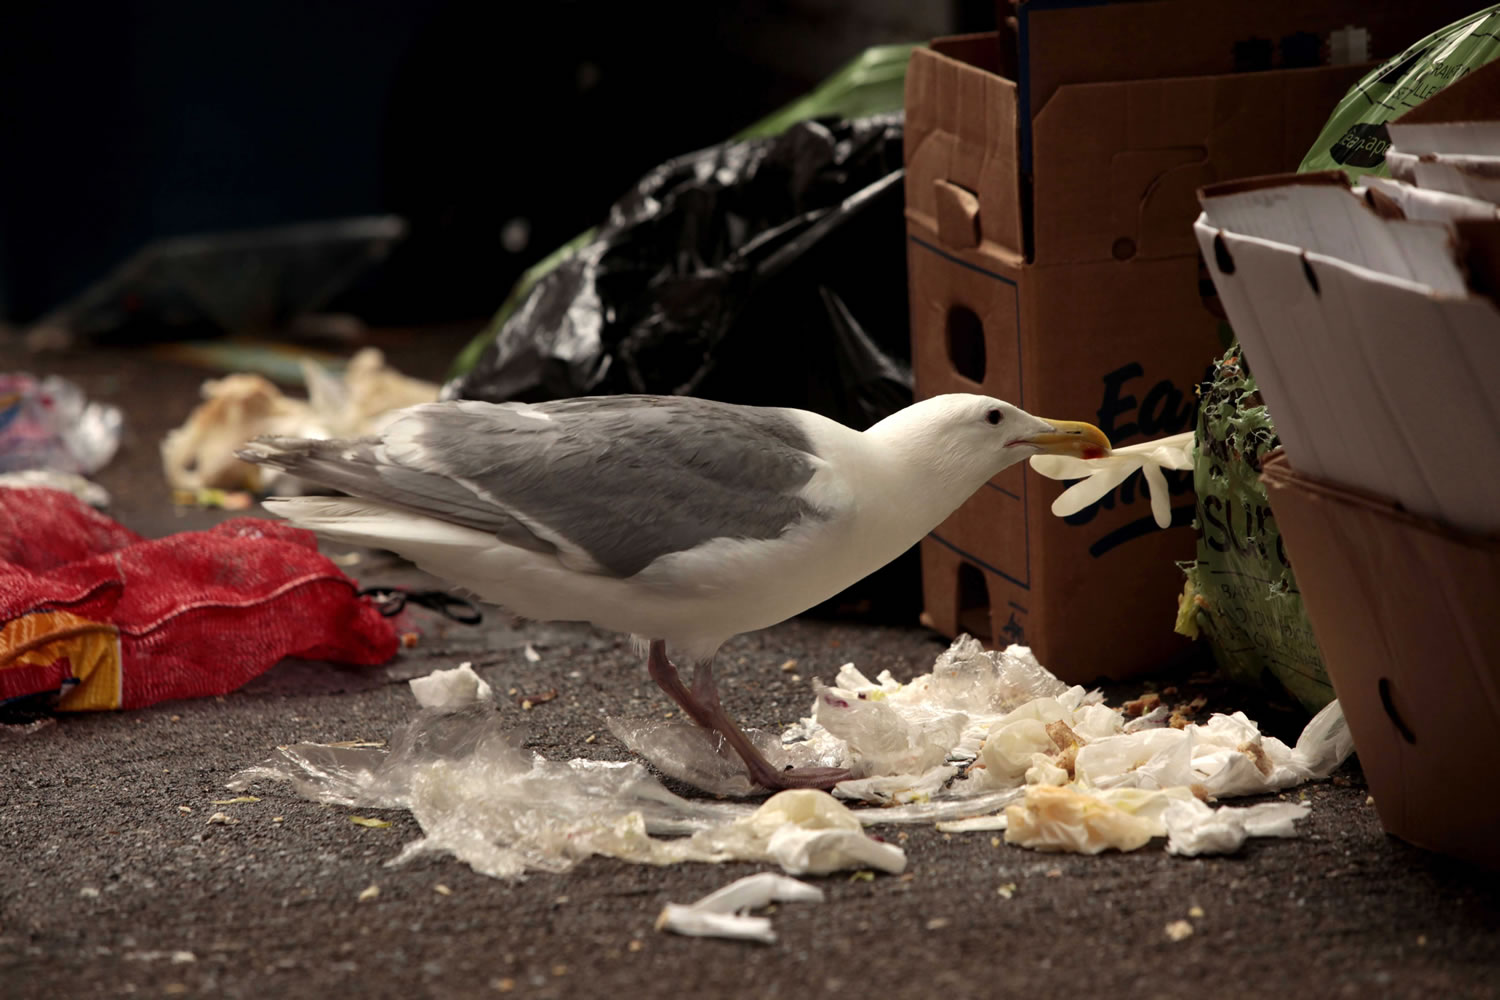 A seagull picks at a plastic glove amid trash in a downtown Seattle alleyway Tuesday.